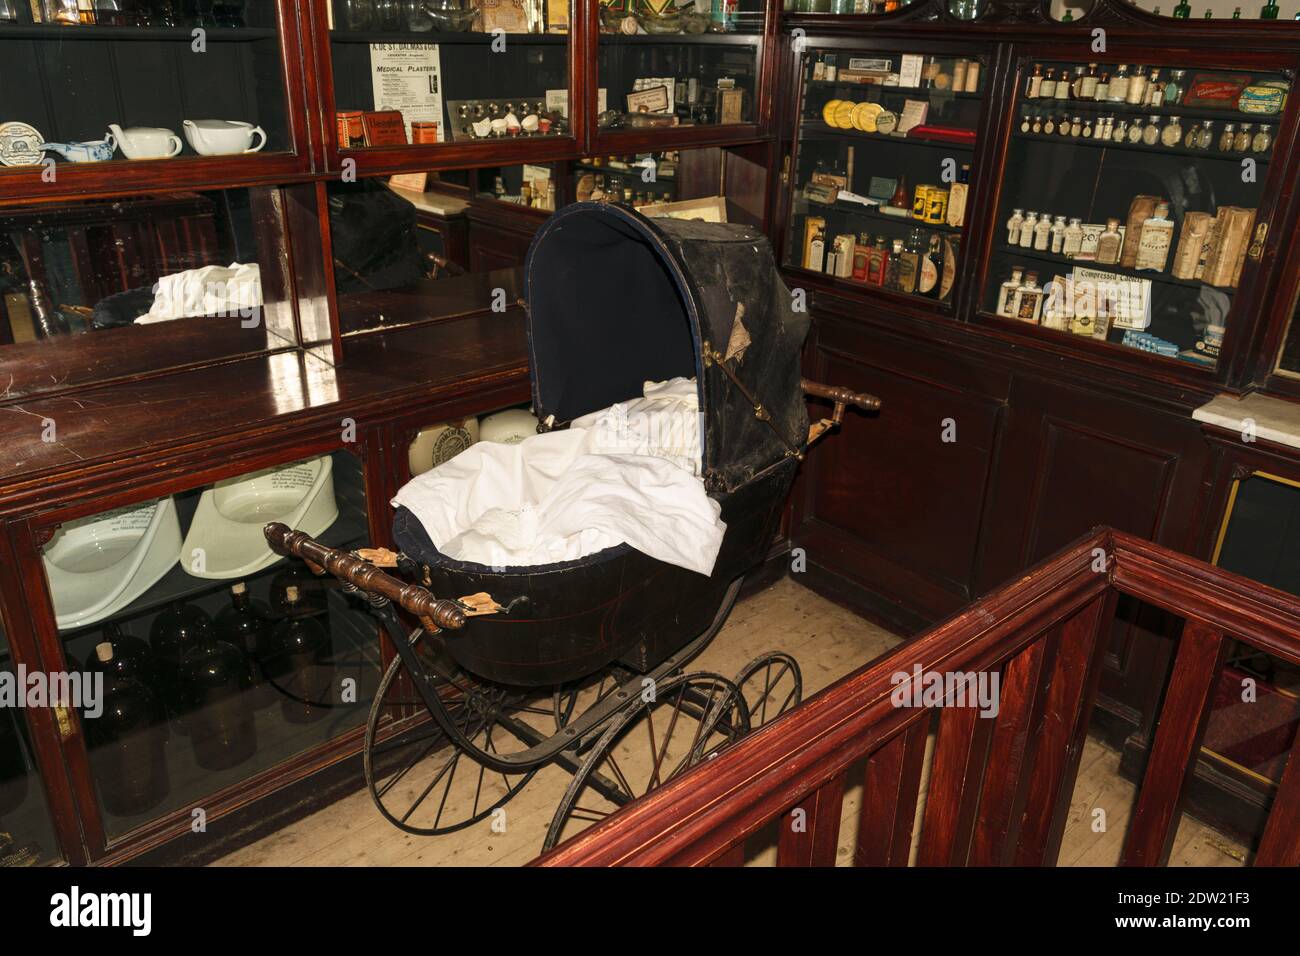 Vintage antique baby stroller with blankets, inside of the drugstore building Stock Photo